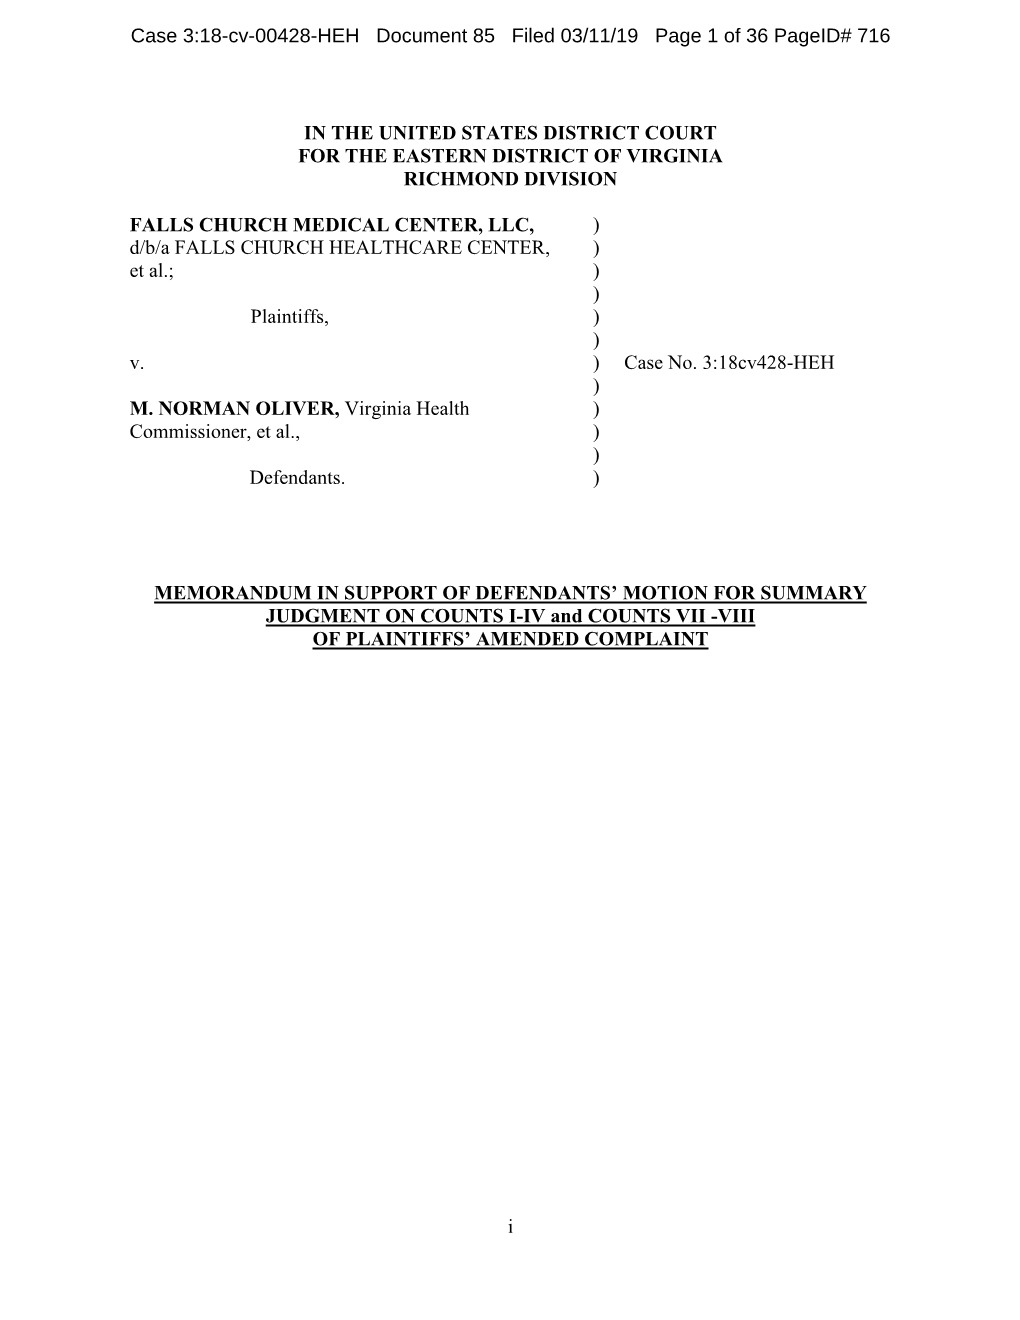 Case 3:18-Cv-00428-HEH Document 85 Filed 03/11/19 Page 1 of 36 Pageid# 716